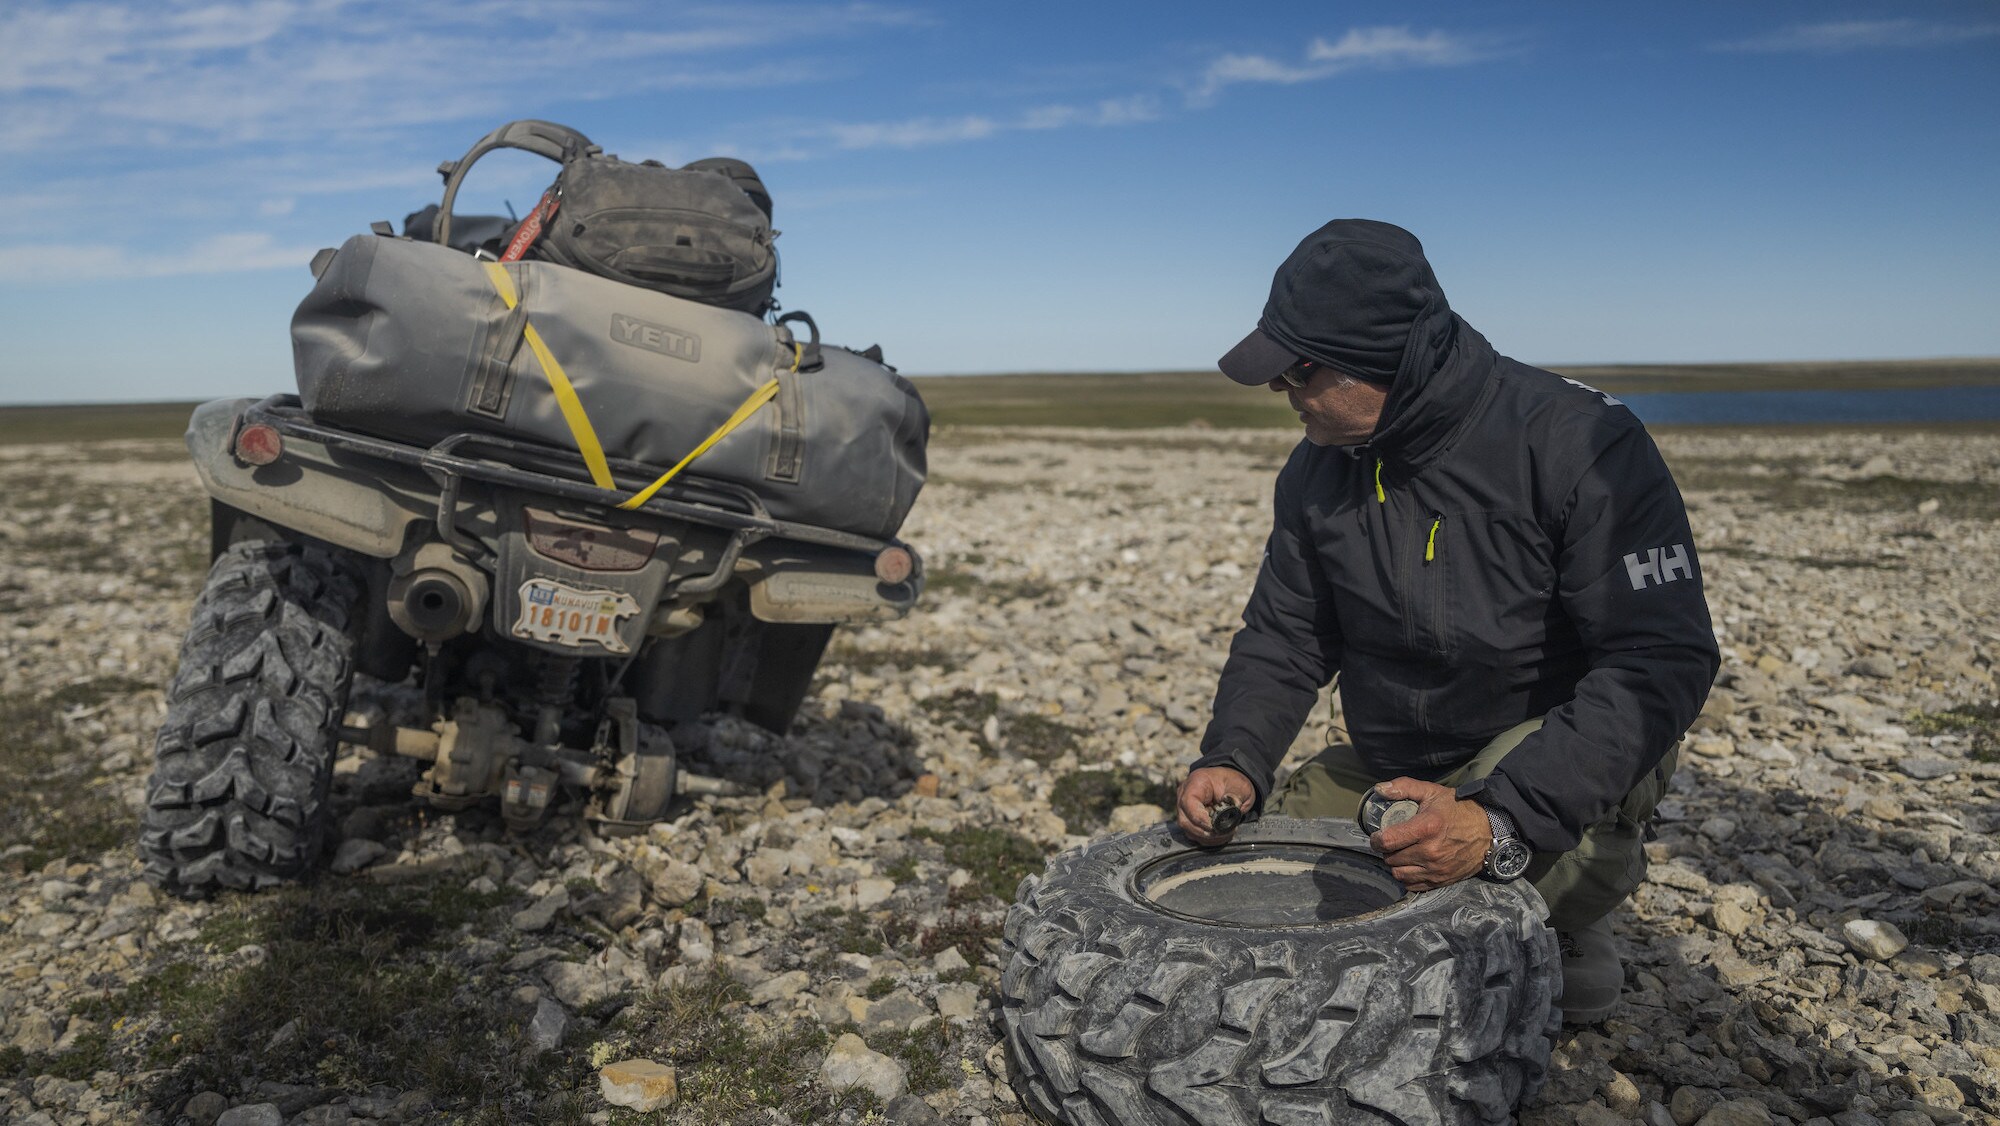 Franklin historian Tom Gross fixes a broken tire on one of the ATVs during the journey in search of Sir John Franklin's lost tomb on King William Island, Nunavut, Canada. (National Geographic/Renan Ozturk)